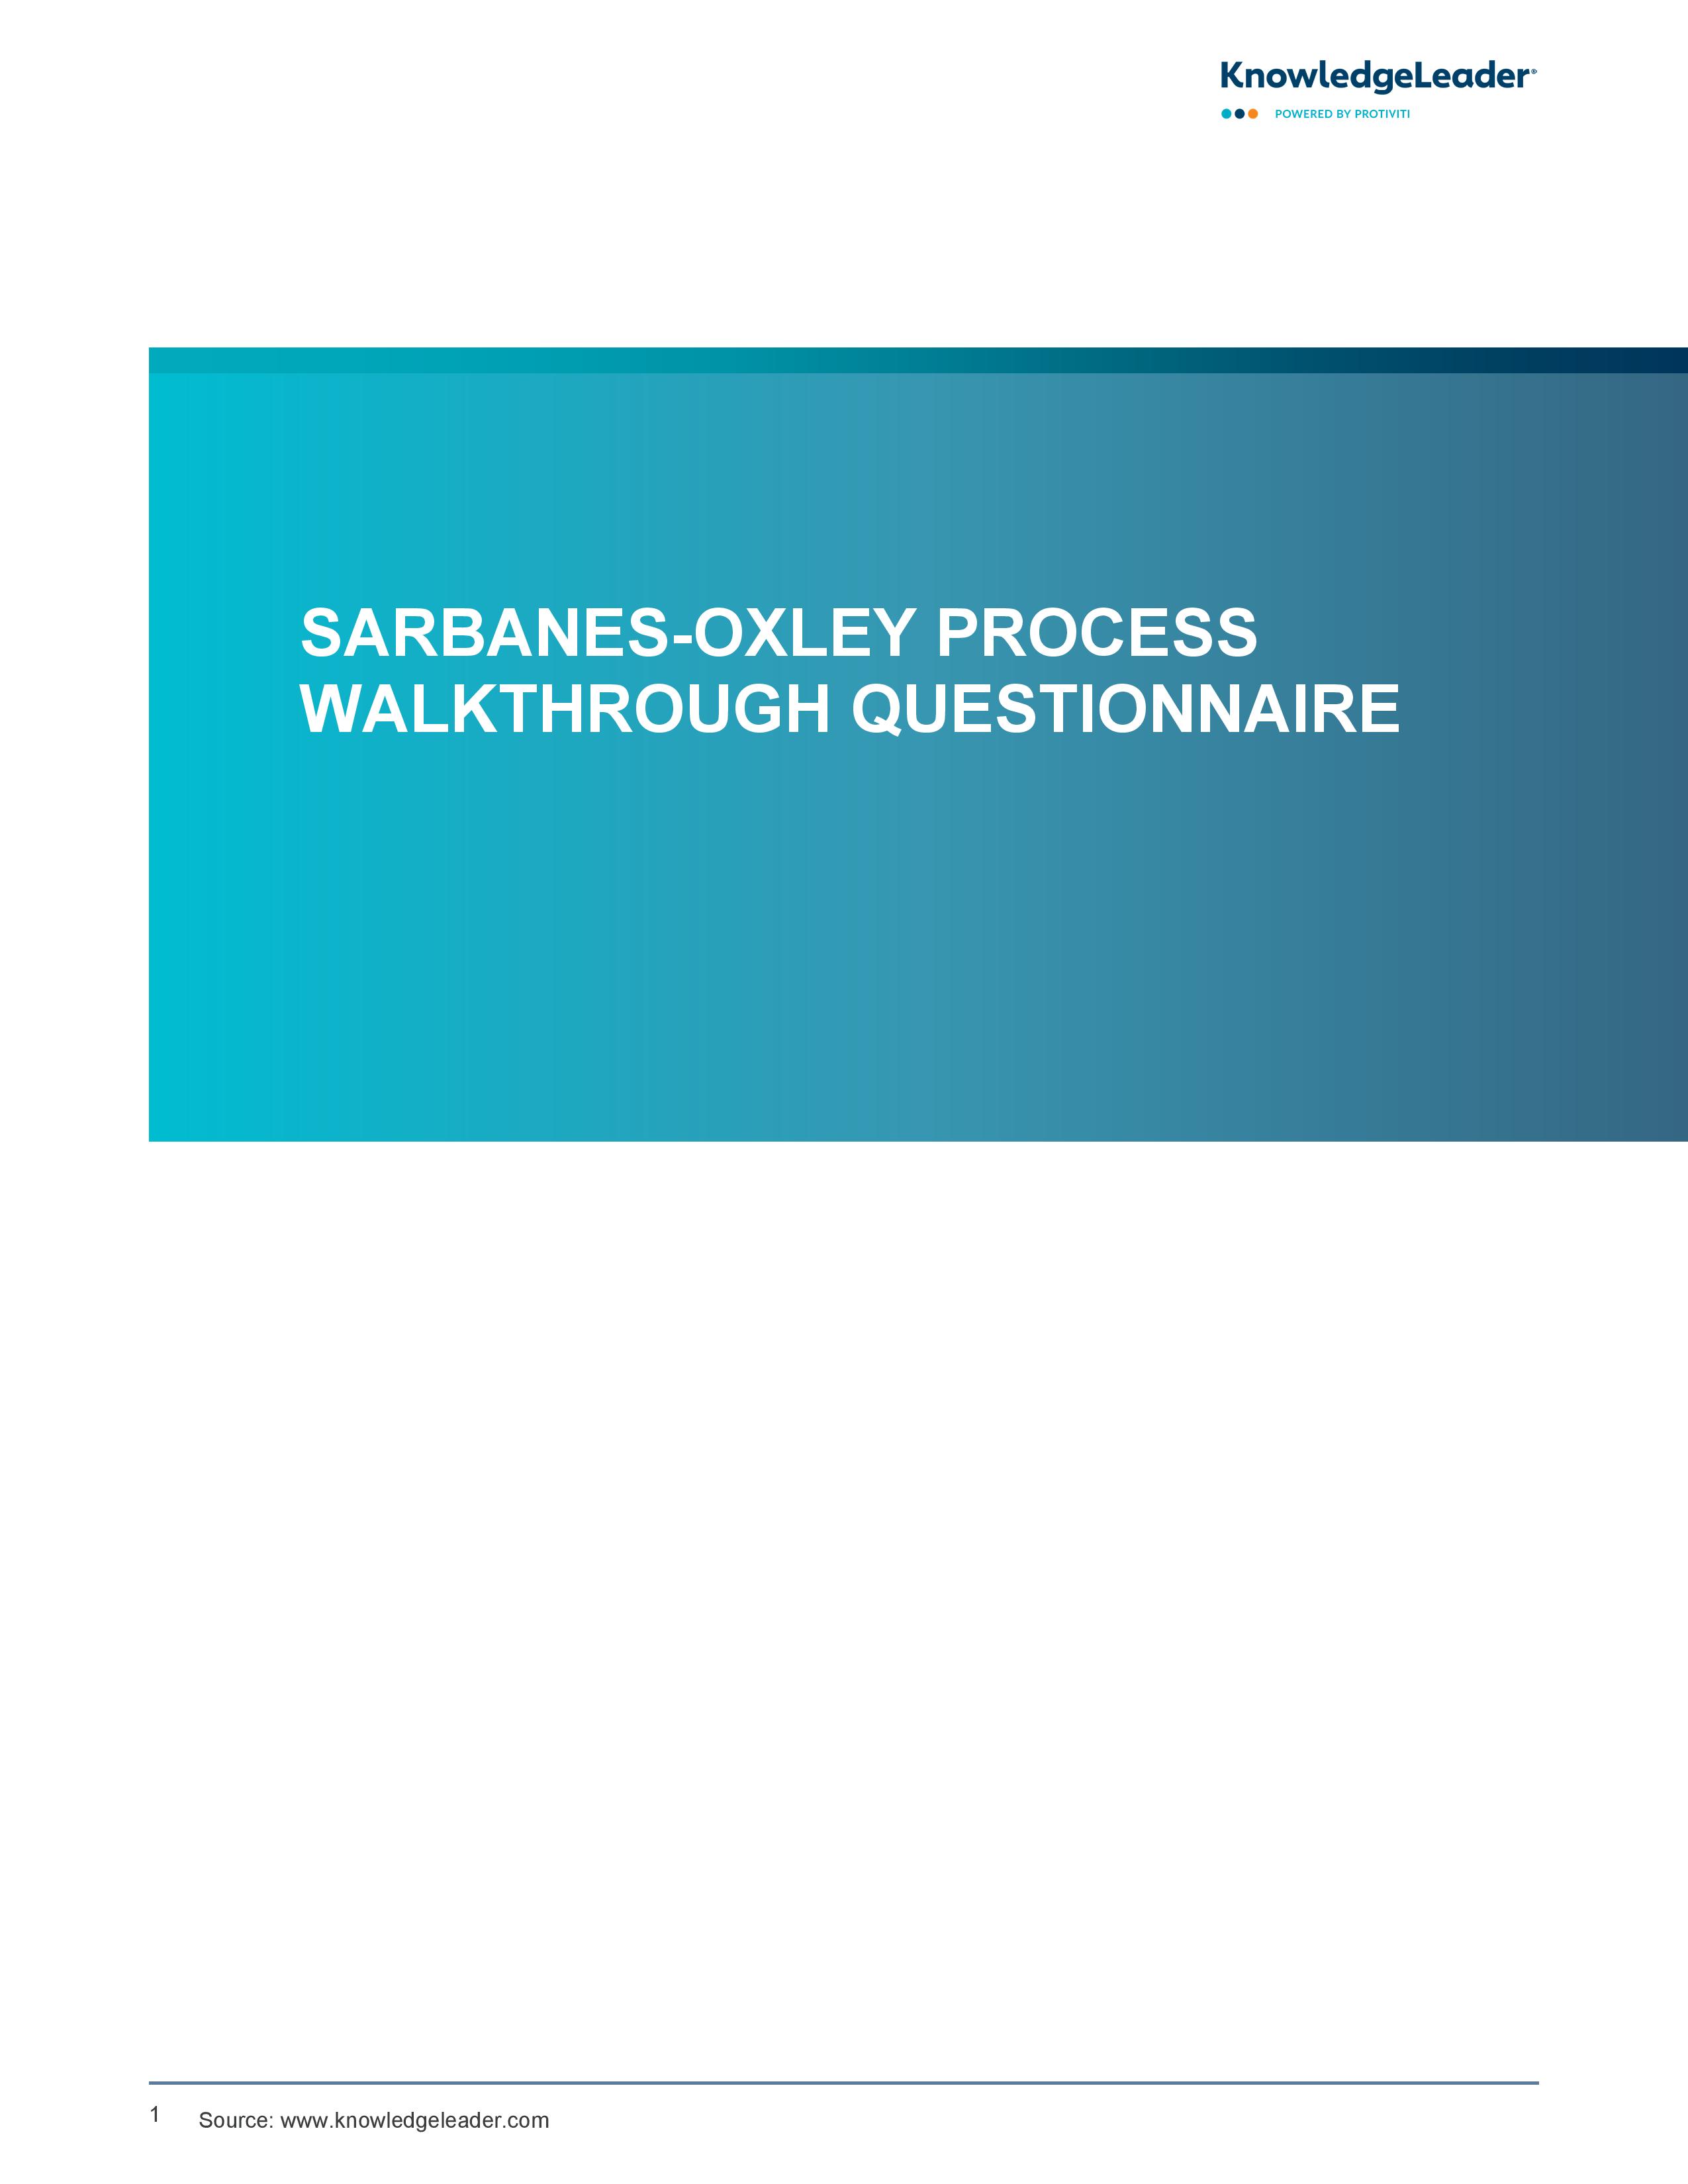 screenshot of the first page of Sarbanes-Oxley Process Walkthrough Questionnaire